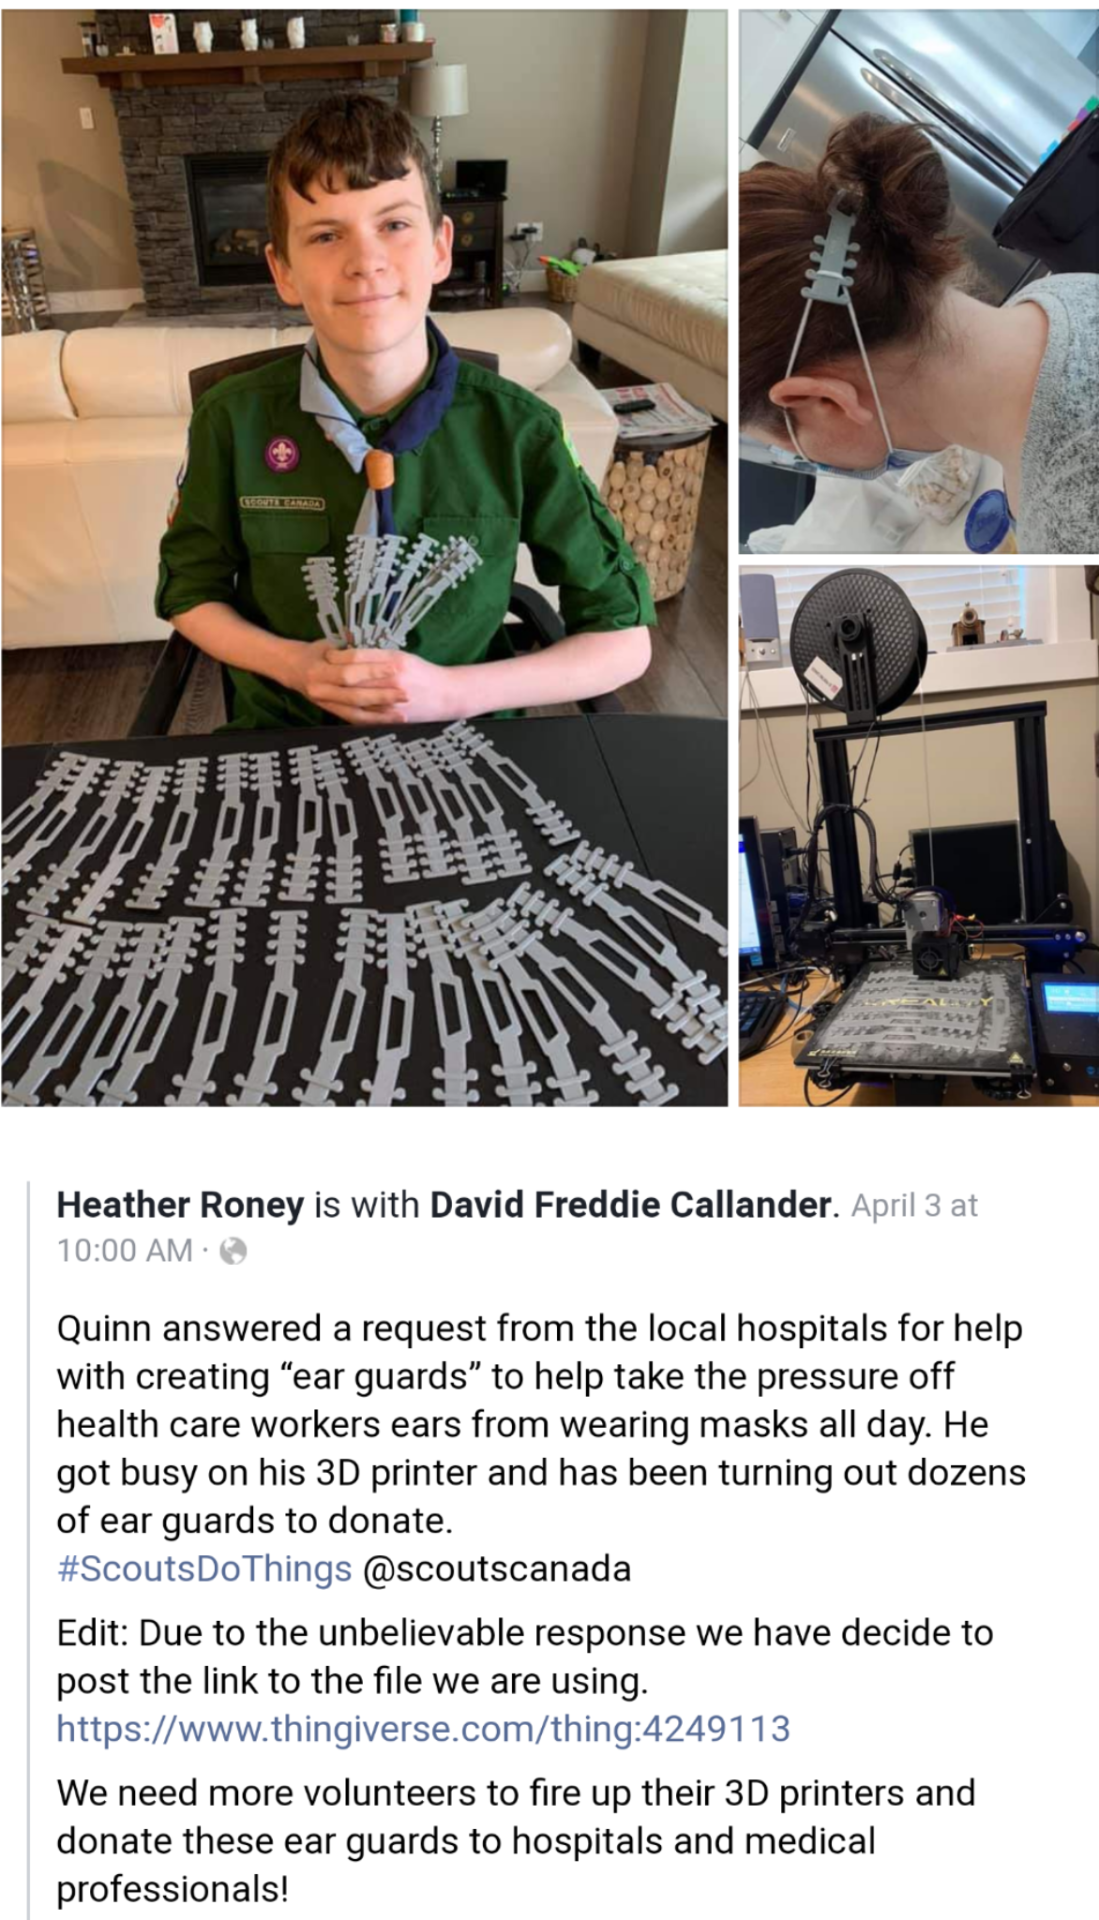 ear guards for masks - Here Heather Roney is with David Freddie Callander. April 3 at Quinn answered a request from the local hospitals for help with creating "ear guards" to help take the pressure off health care workers ears from wearing masks all day. 